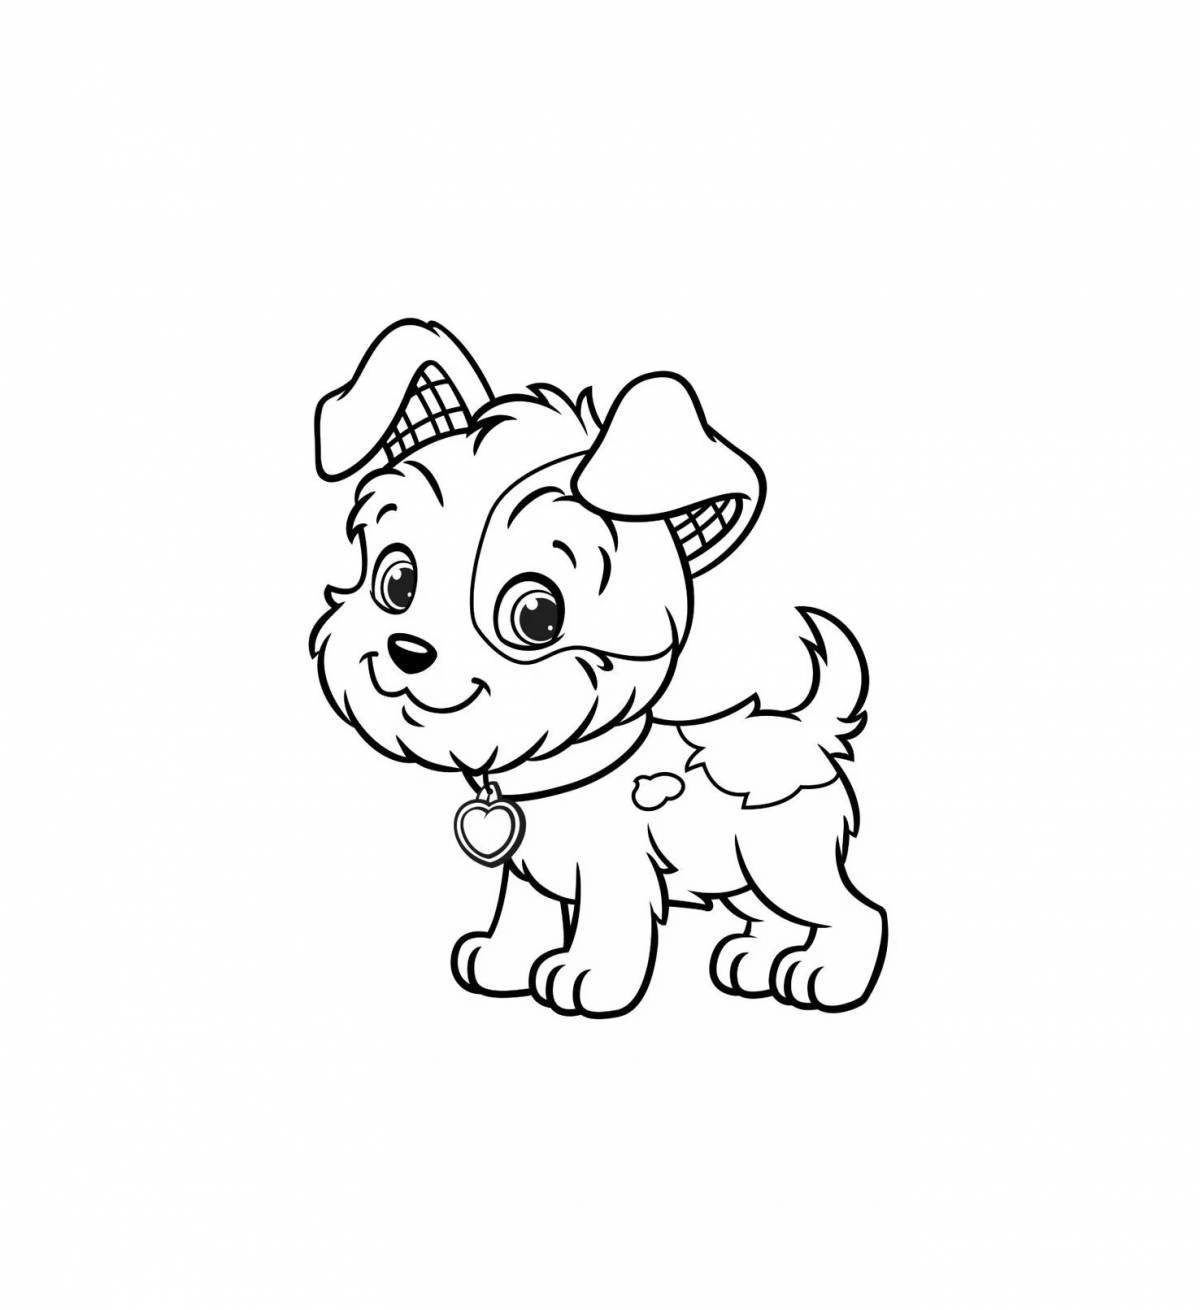 Tiny puppy coloring book